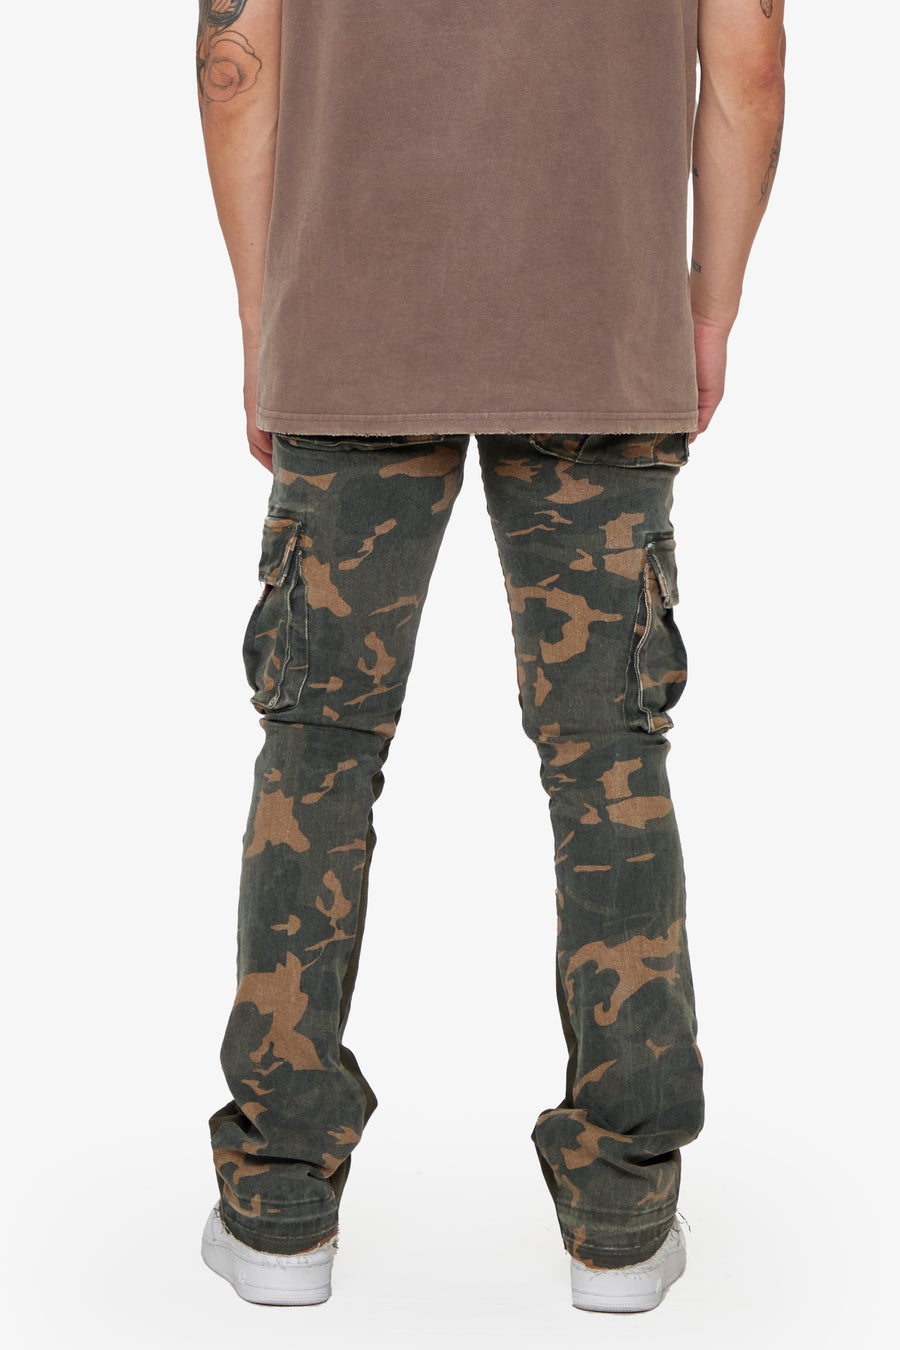 "COURAGE" OLIVE CAMO STACKED FLARE JEAN